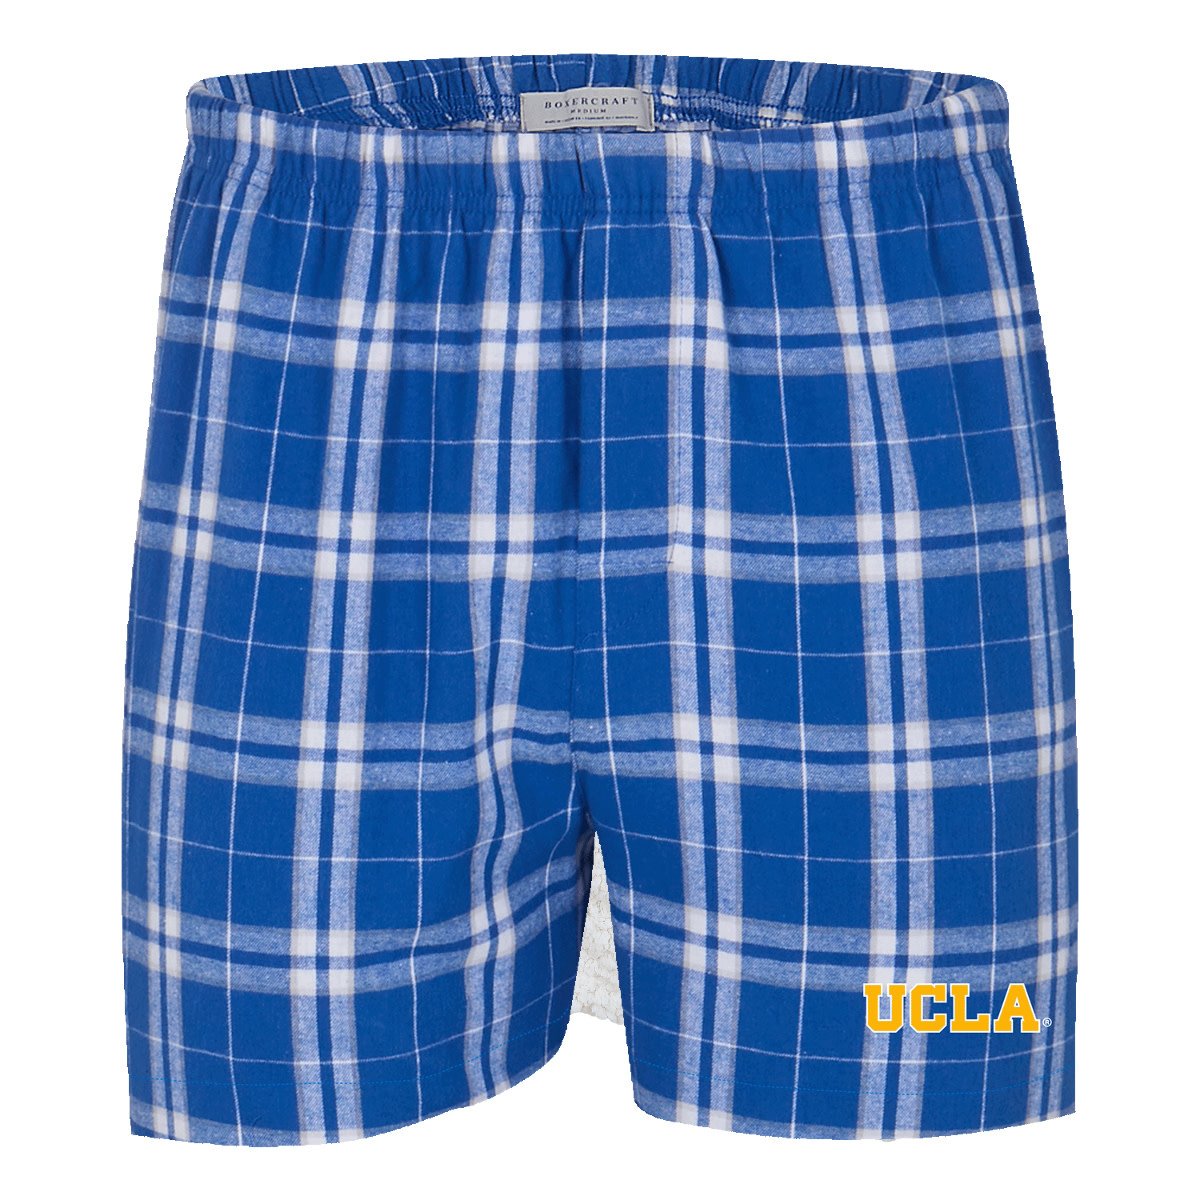 Youth Blue Flannel Print Boxer Shorts, Mens Sports Underwear